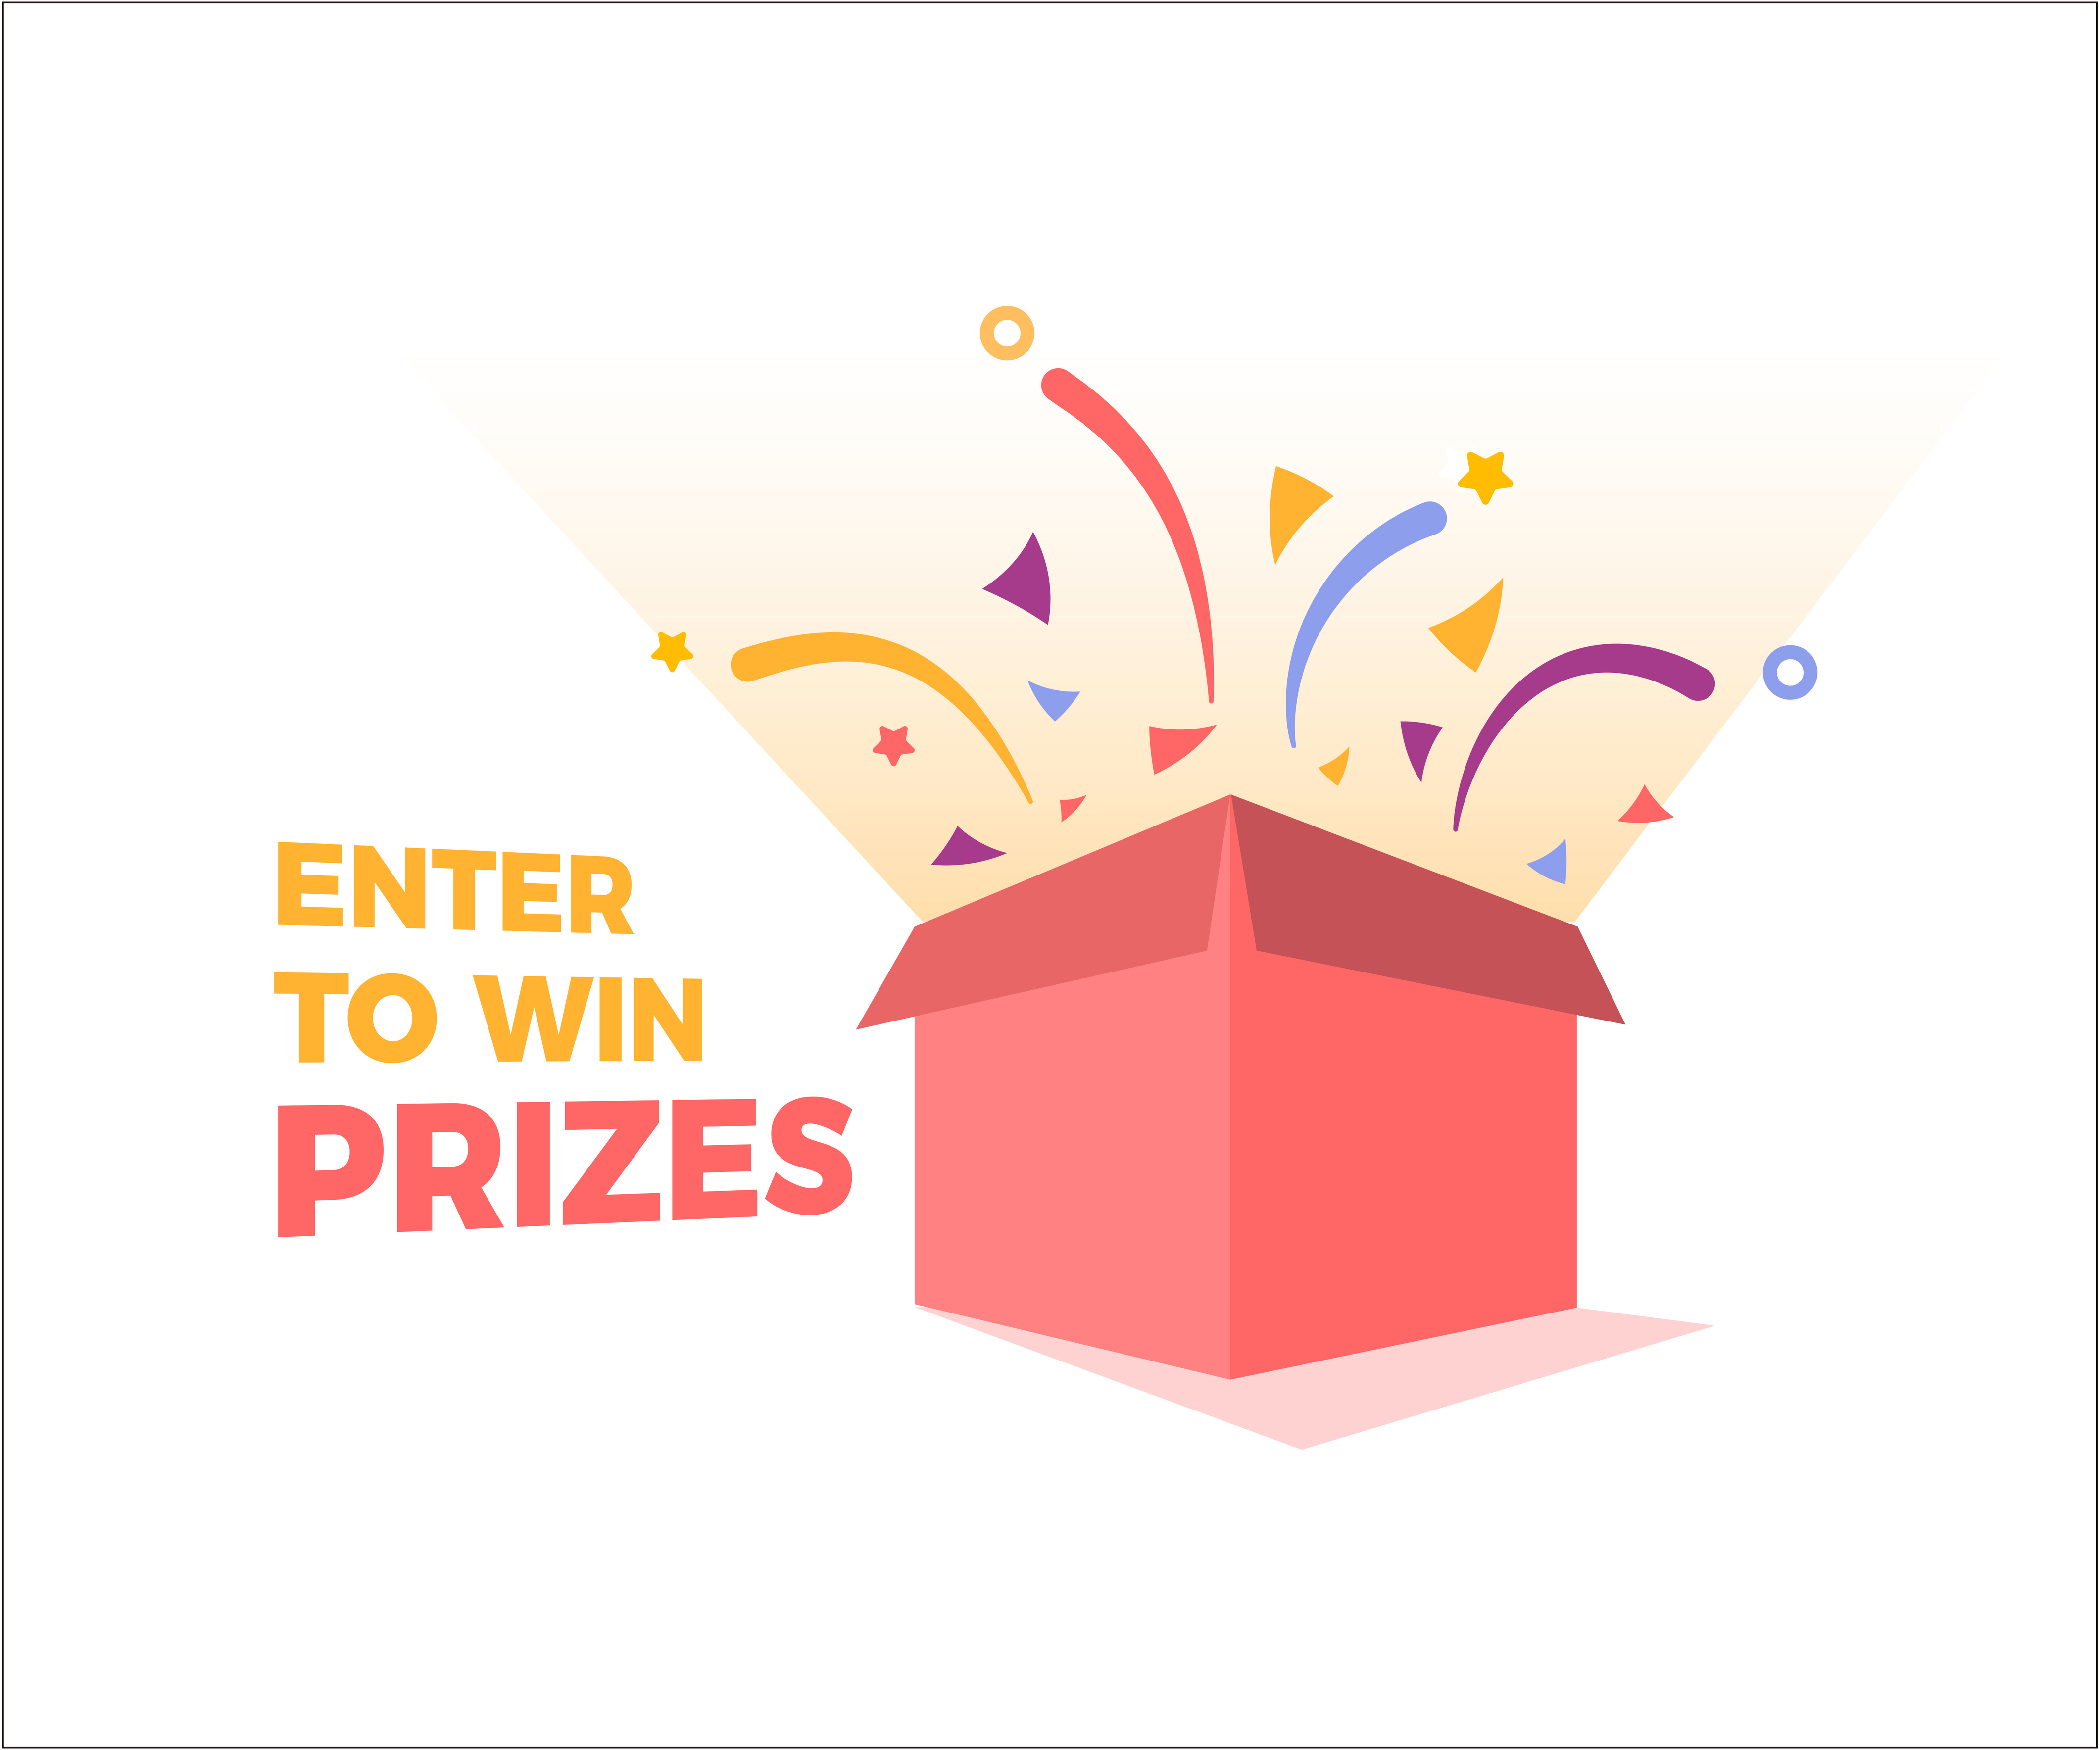 Graphic design saying "Enter to win prizes"